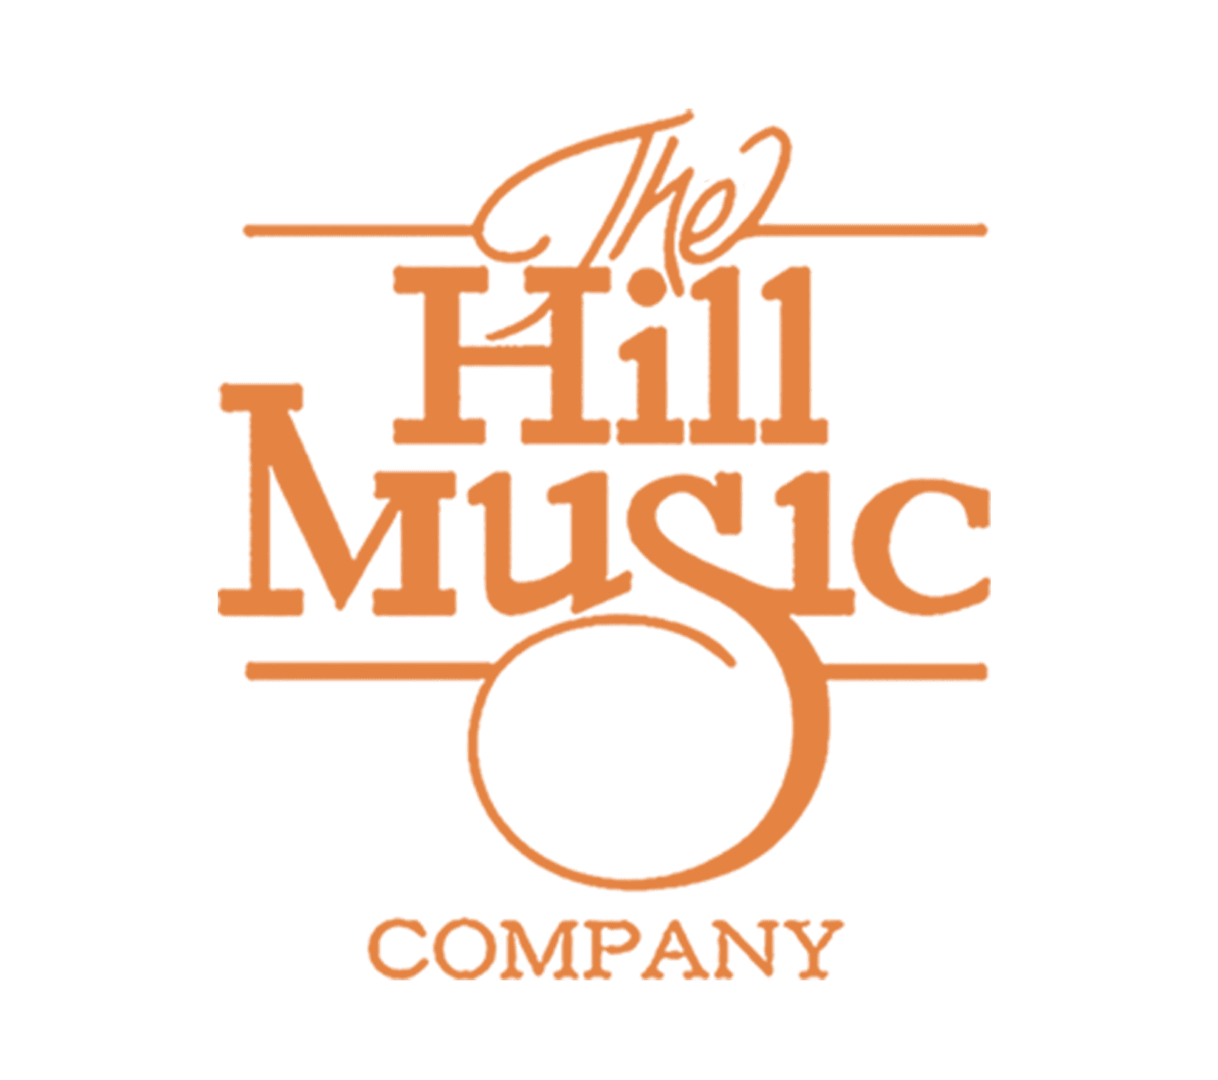 https://tomgeroumusic.com/wp-content/uploads/Hill-Music-Company-ORG.png